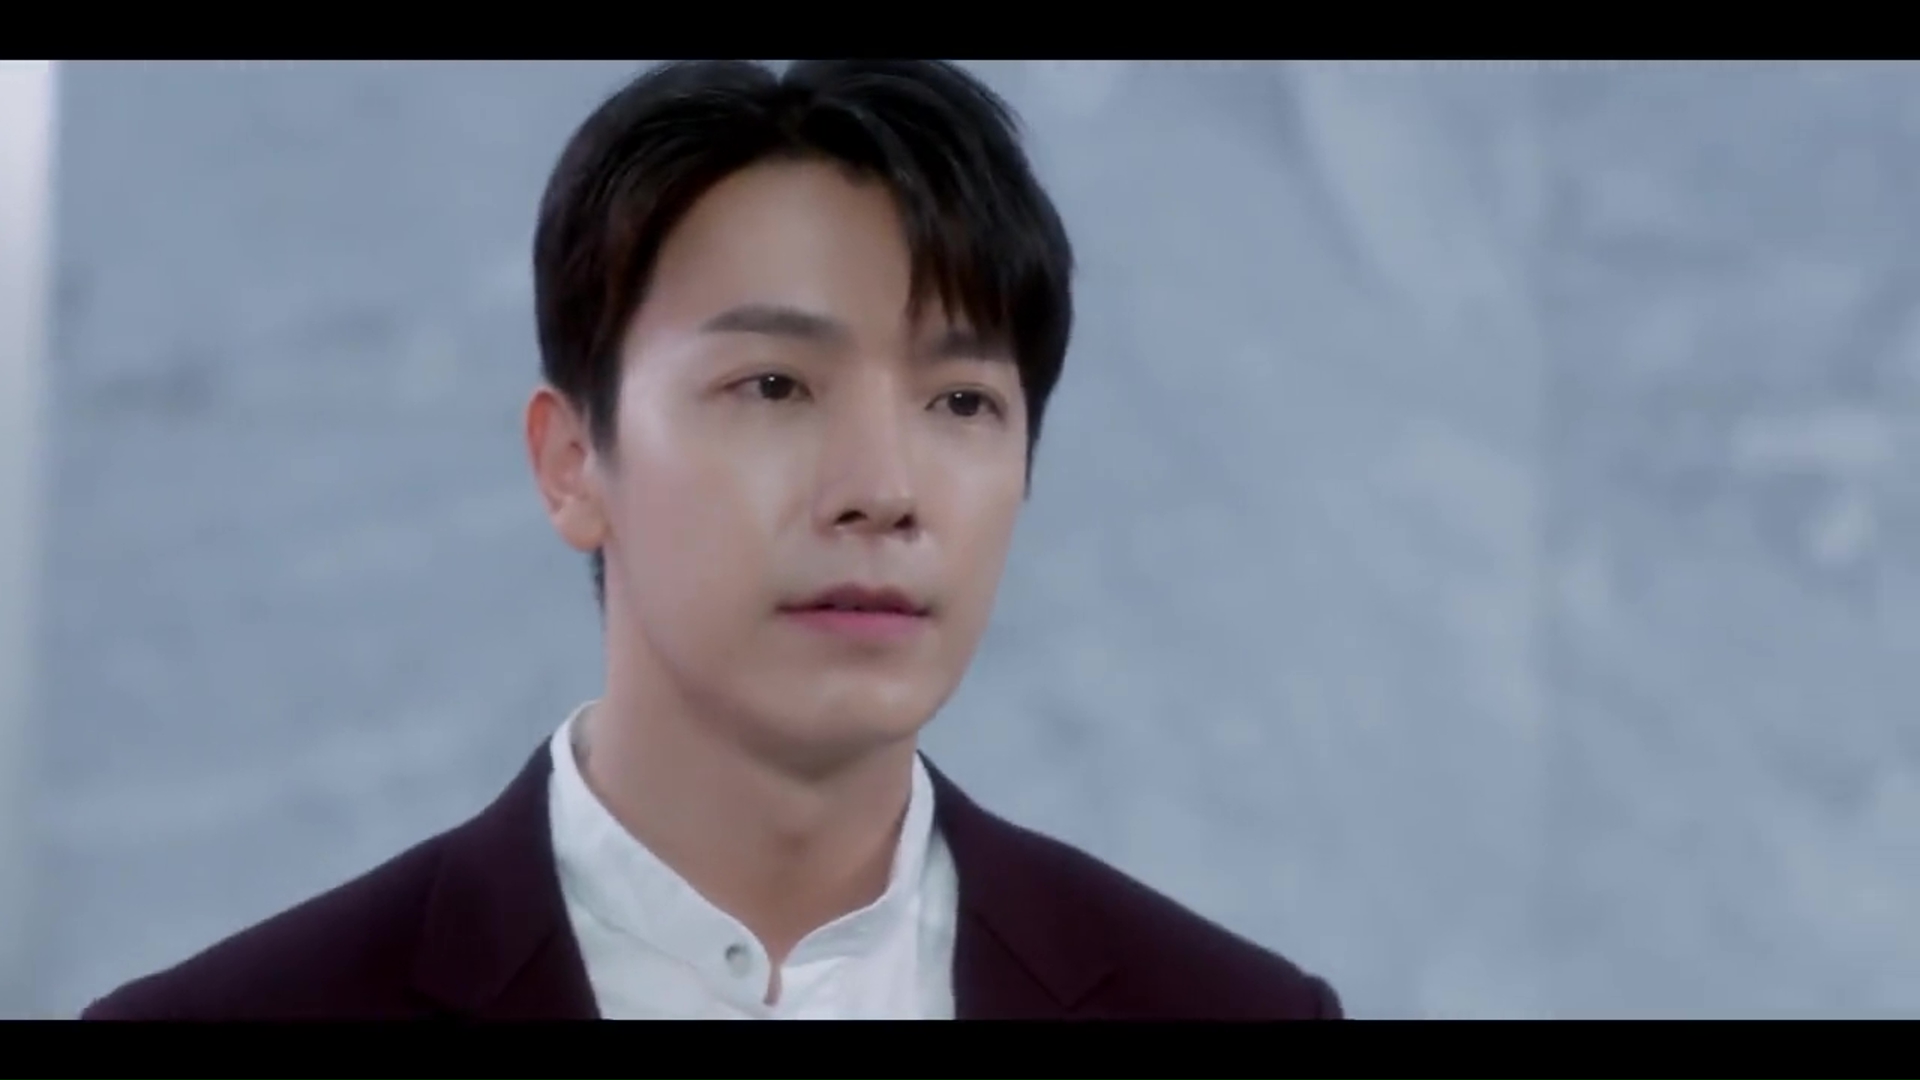 Song Ha-yoon and Donghae in Oh! Young-shim: Episodes 1-2